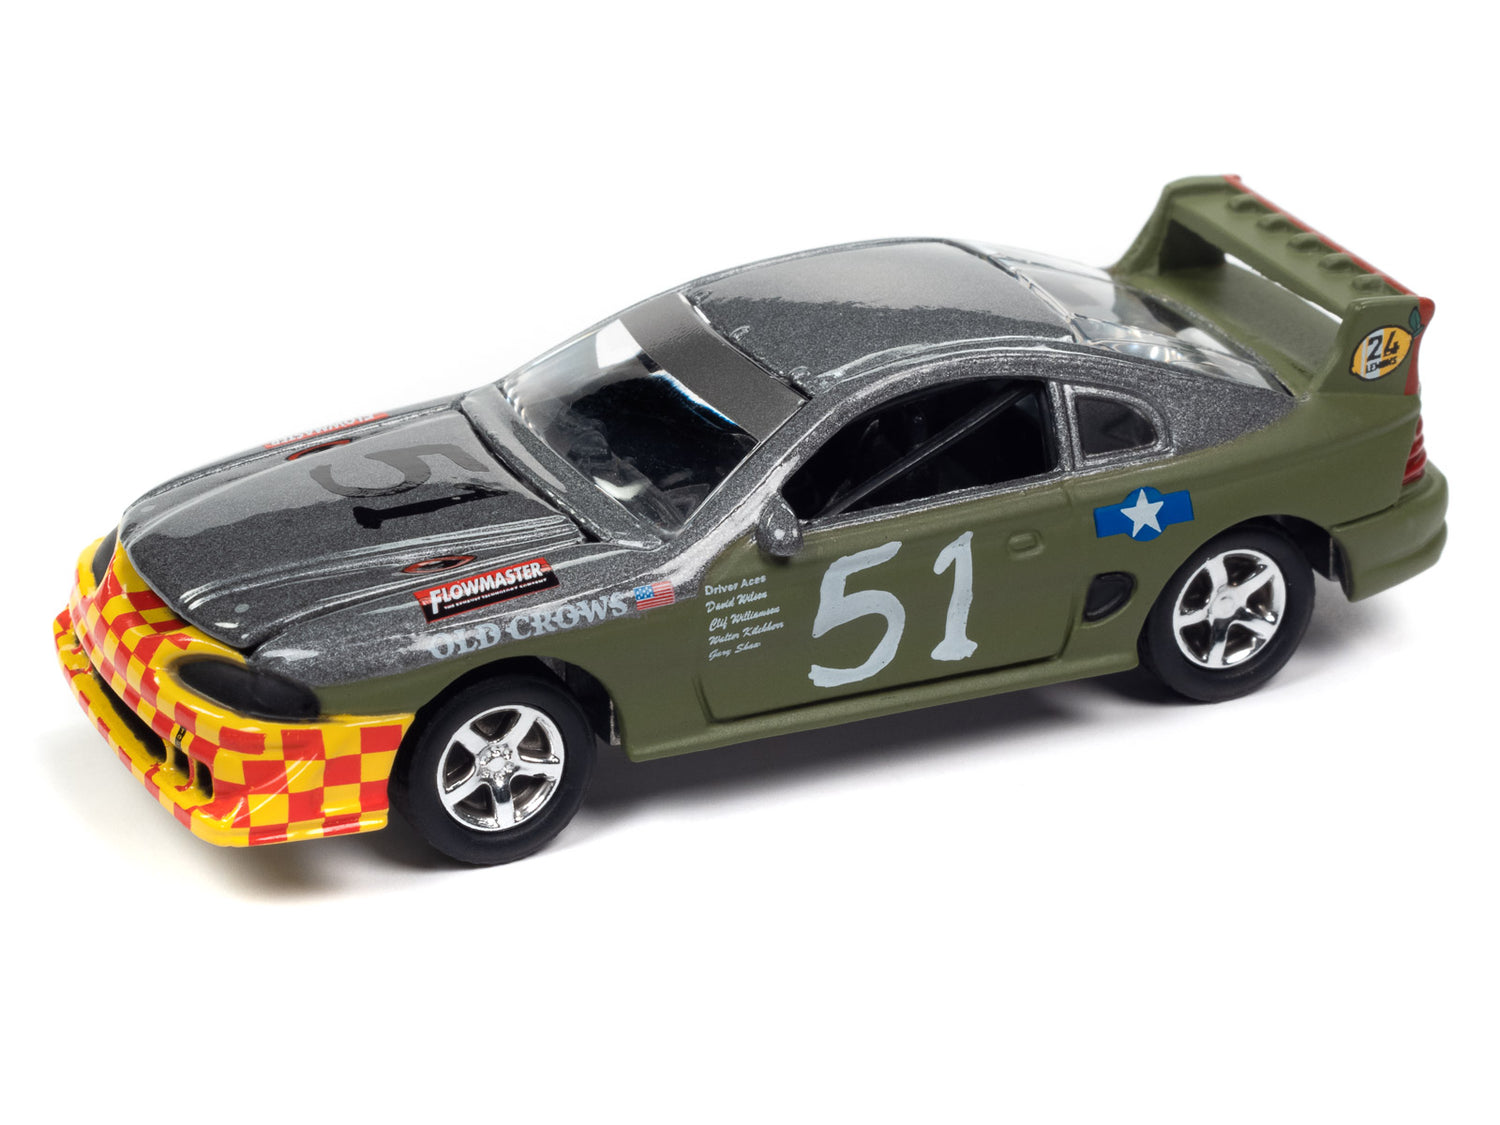 Johnny Lightning Street Freaks 1990s Ford Mustang Race Car (24hrs of LeMons) (Dark Silver/Army Green, Old Crows Graphics) 1:64 Scale Diecast